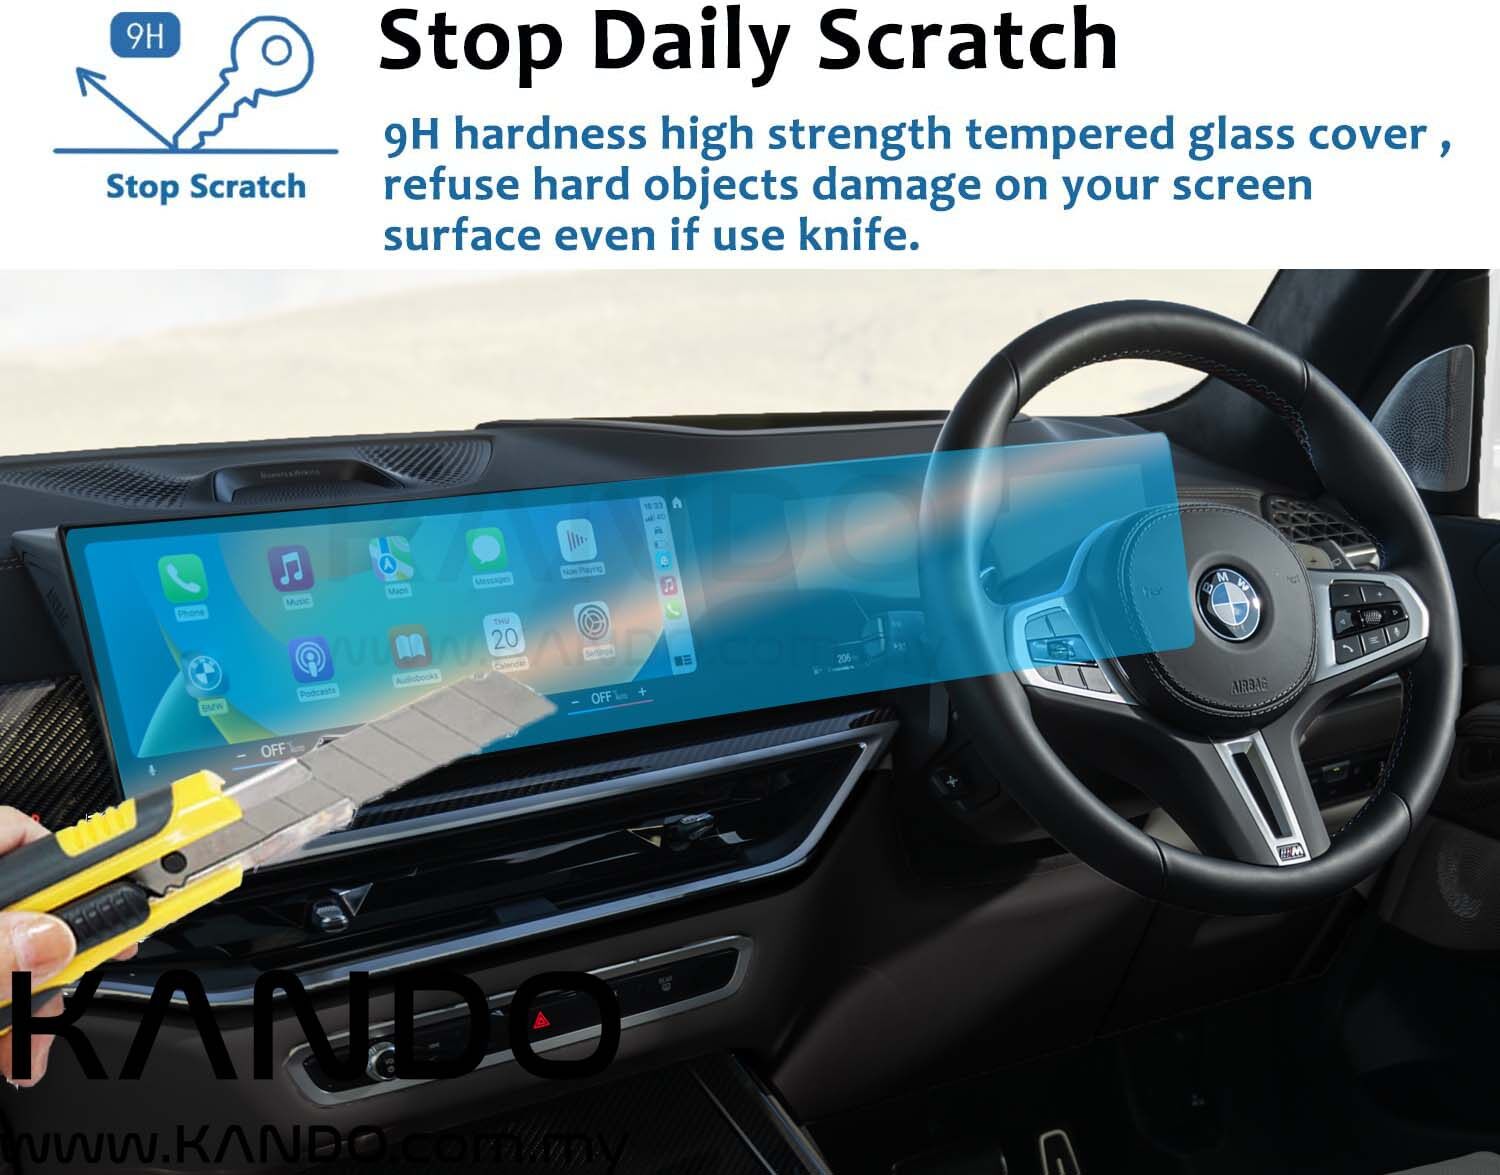 BMW X7 Tempered Glass Protector BMW X7 Screen Protector BMW G07 X7 Meter Screen Protector G07 X7 LCI Head Unit Screen Protector BMW X7 tempered Glass